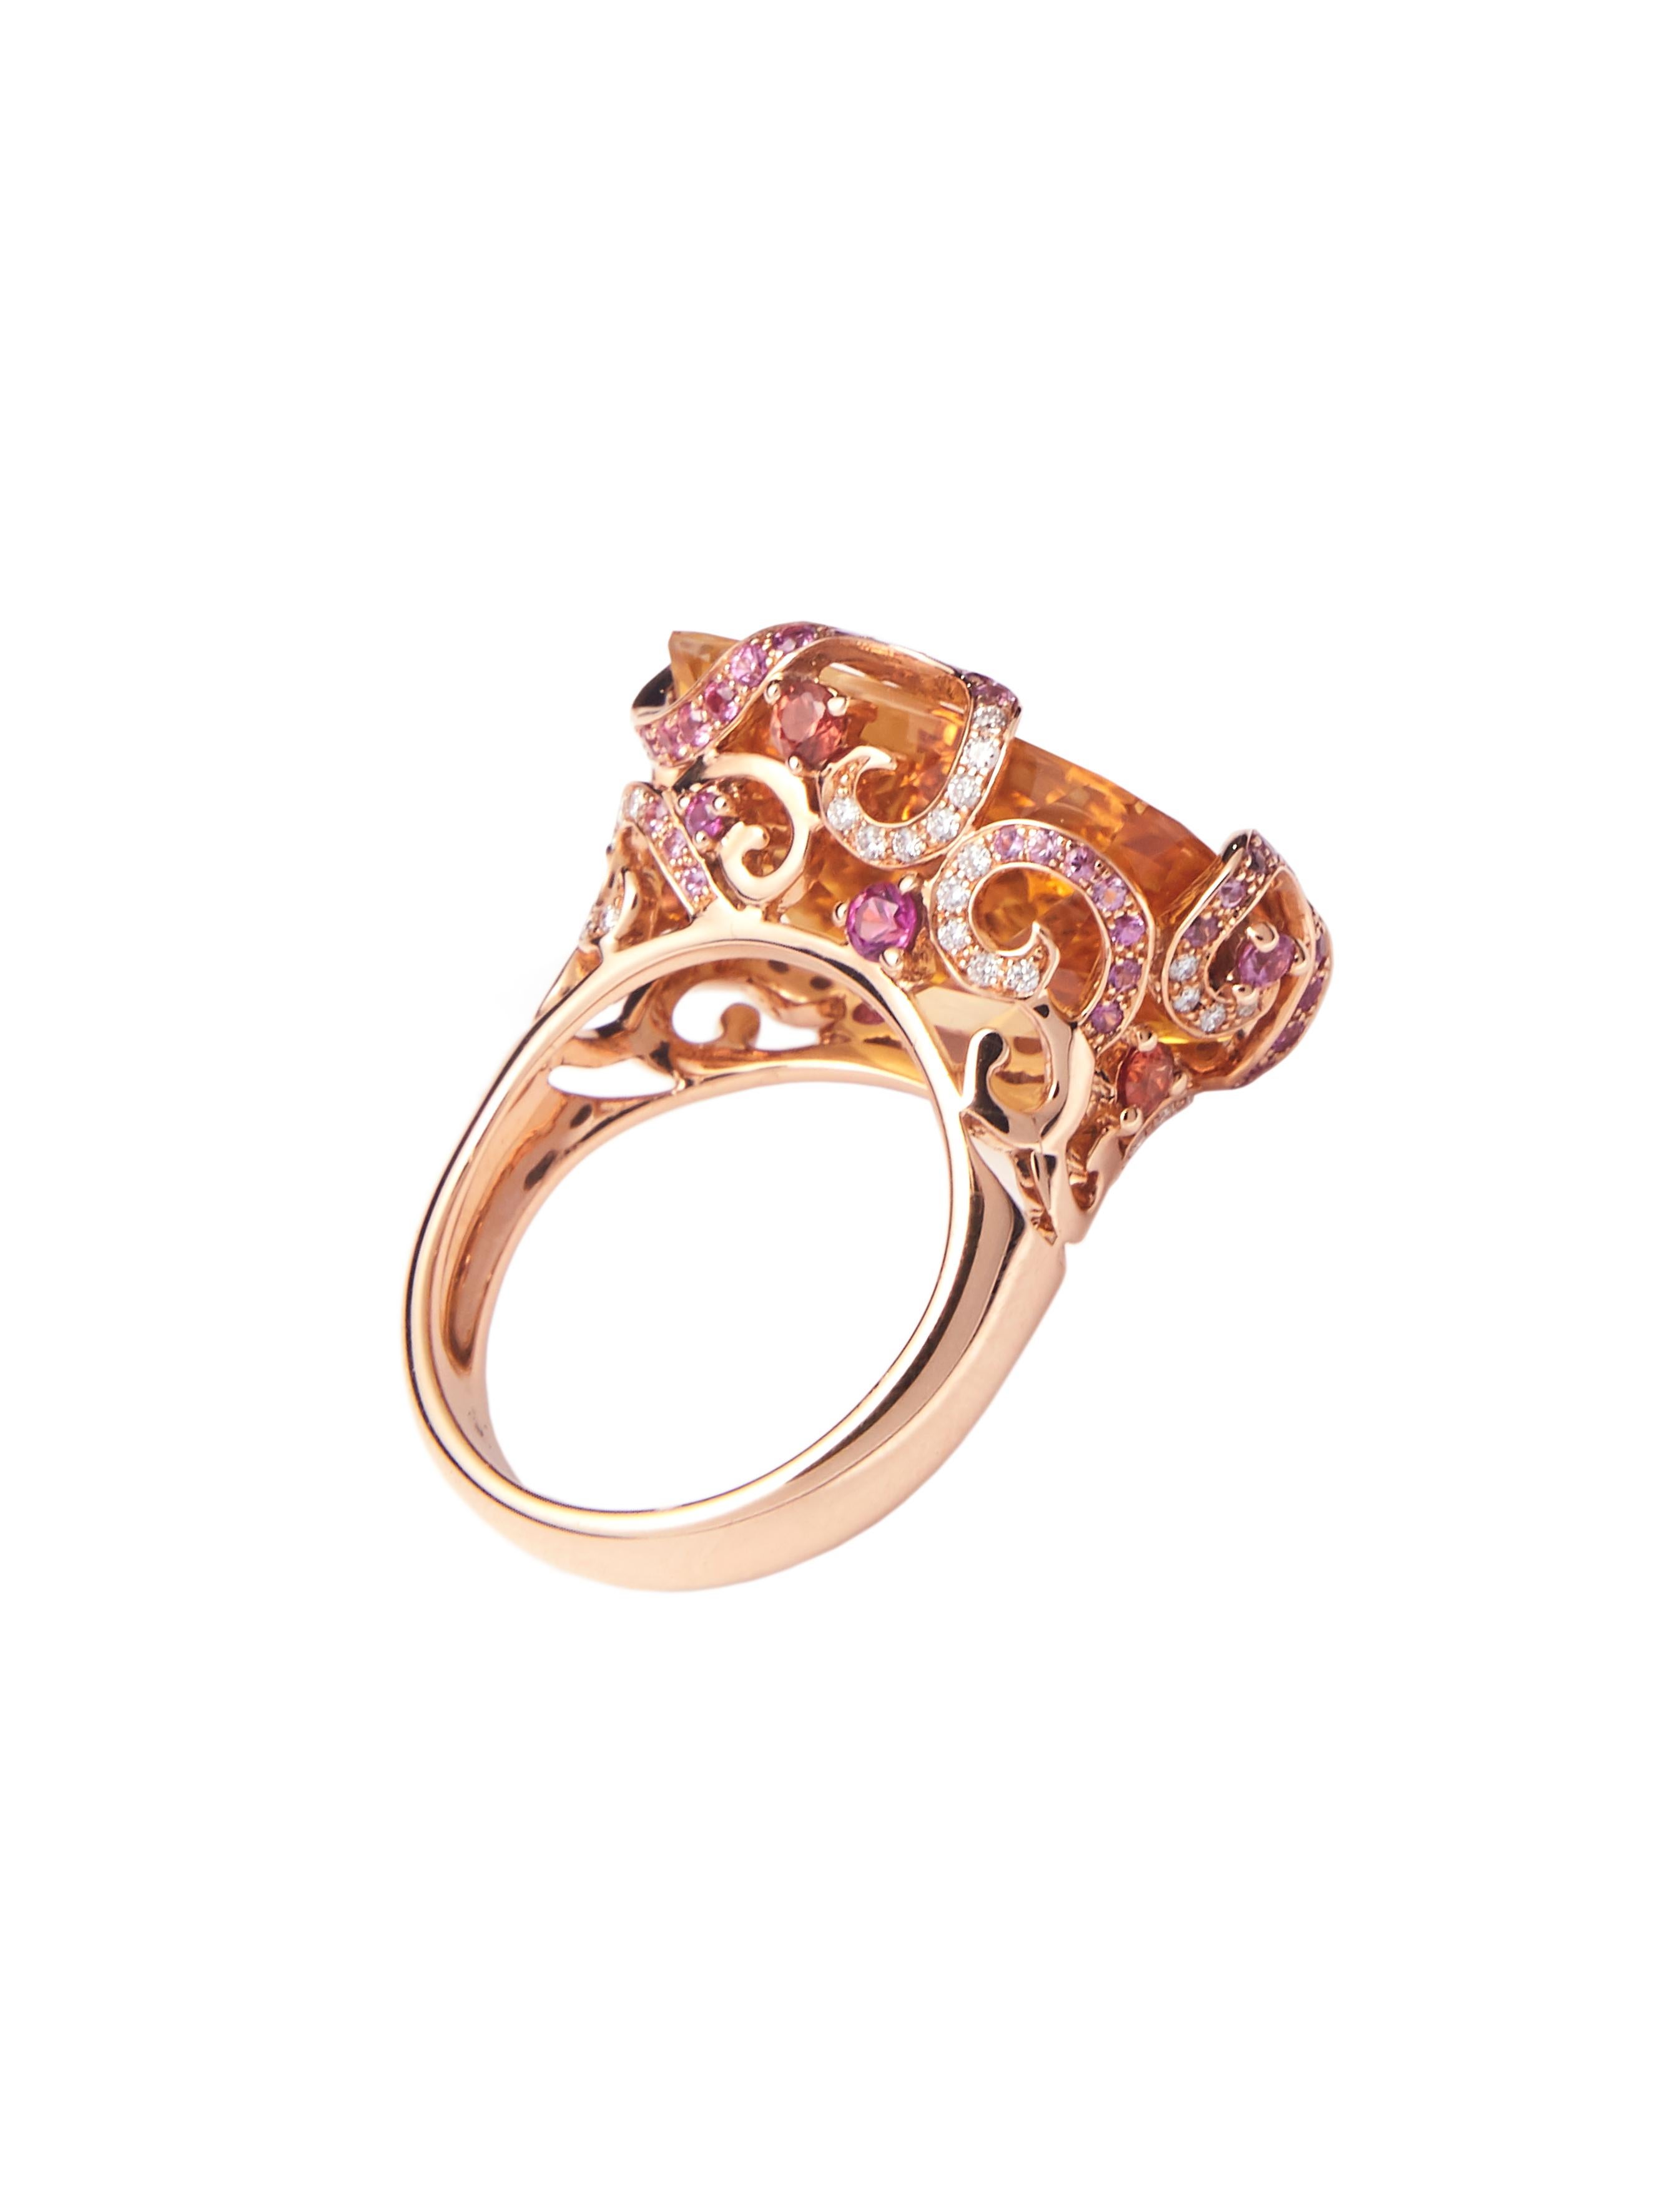 18 Karat Rose Gold Ring with Smokey Quartz Diamonds and Pink Sapphire For Sale 1